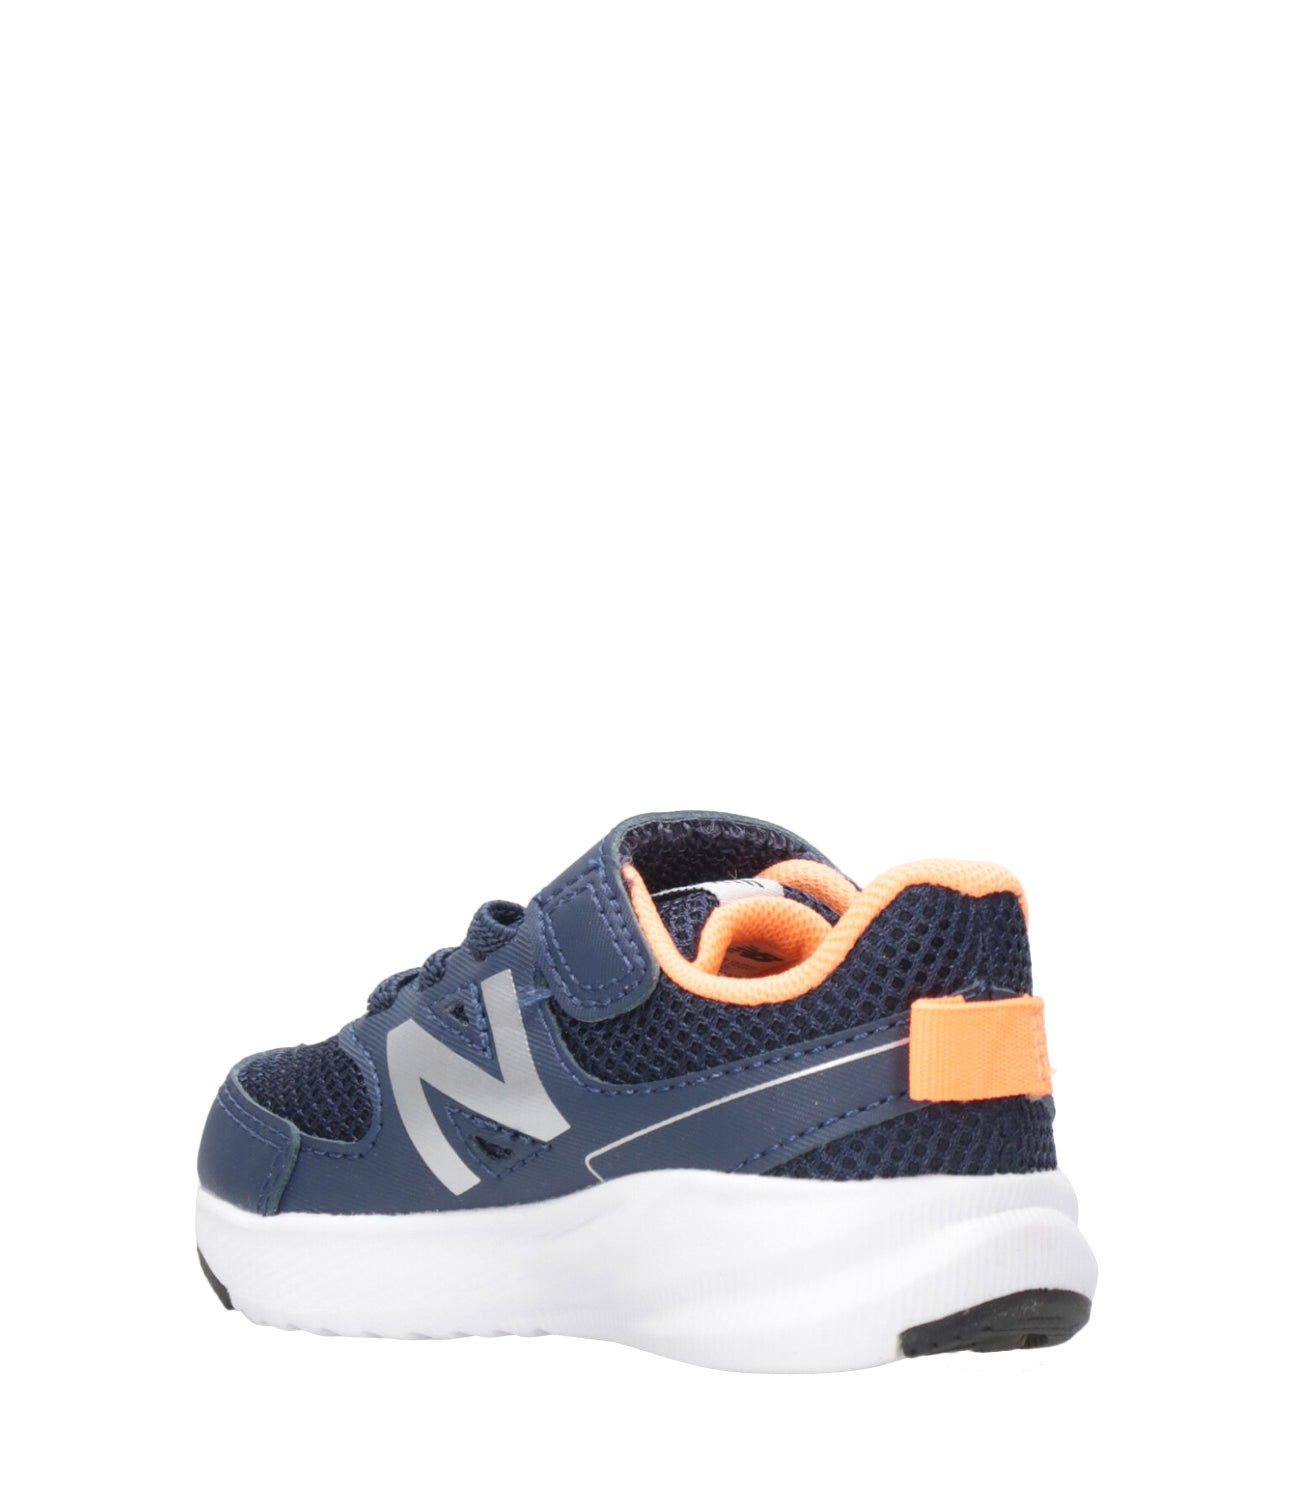 New Balance Kids | Sneakers 570v03 Bungee Navy Blue